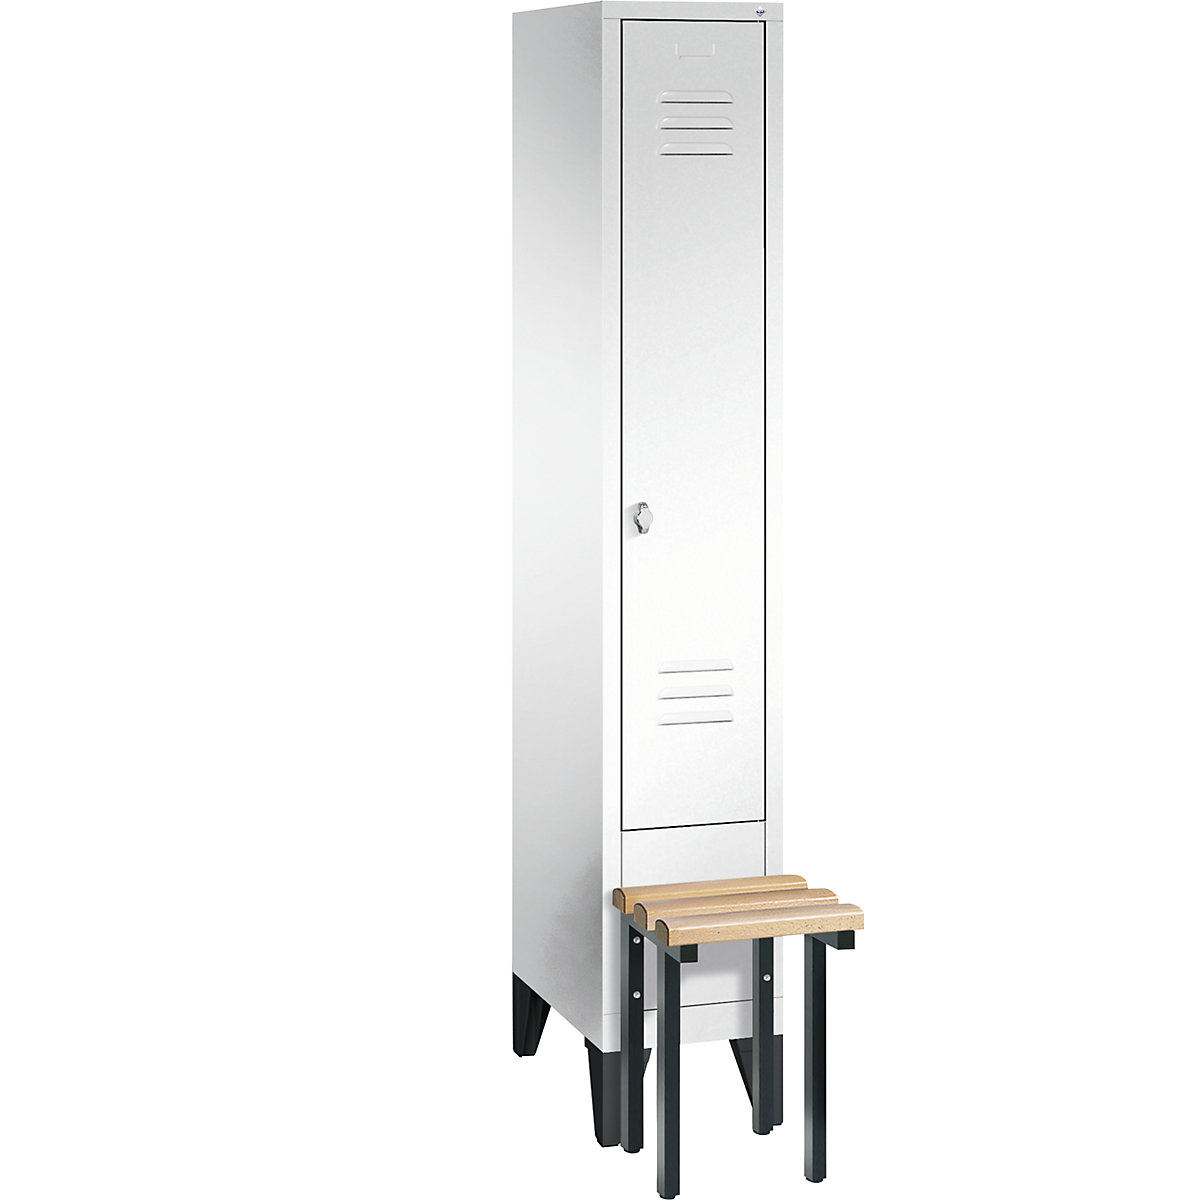 CLASSIC cloakroom locker with bench mounted in front – C+P, 1 compartment, compartment width 300 mm, traffic white-12